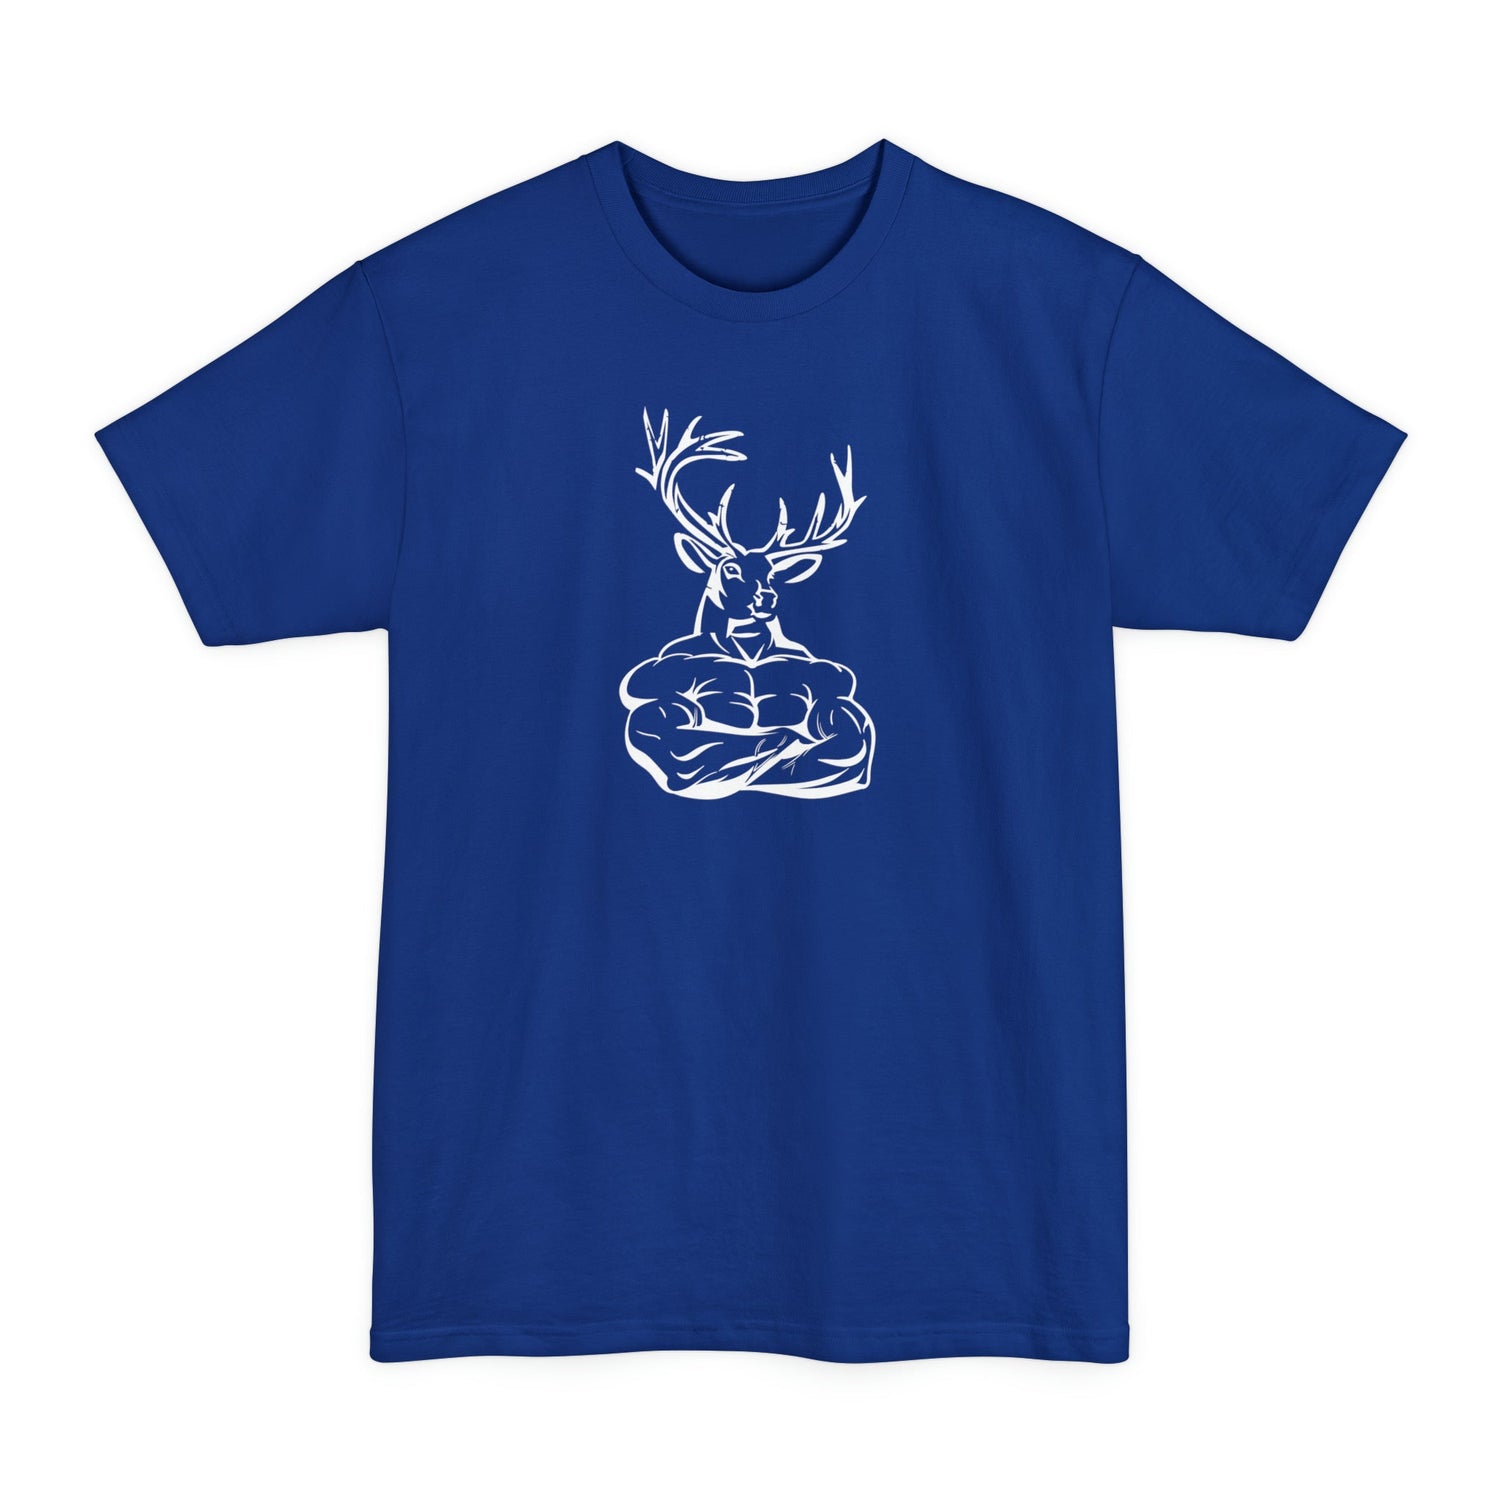 Big and tall deer hunting t-shirt, color blue, back design placement